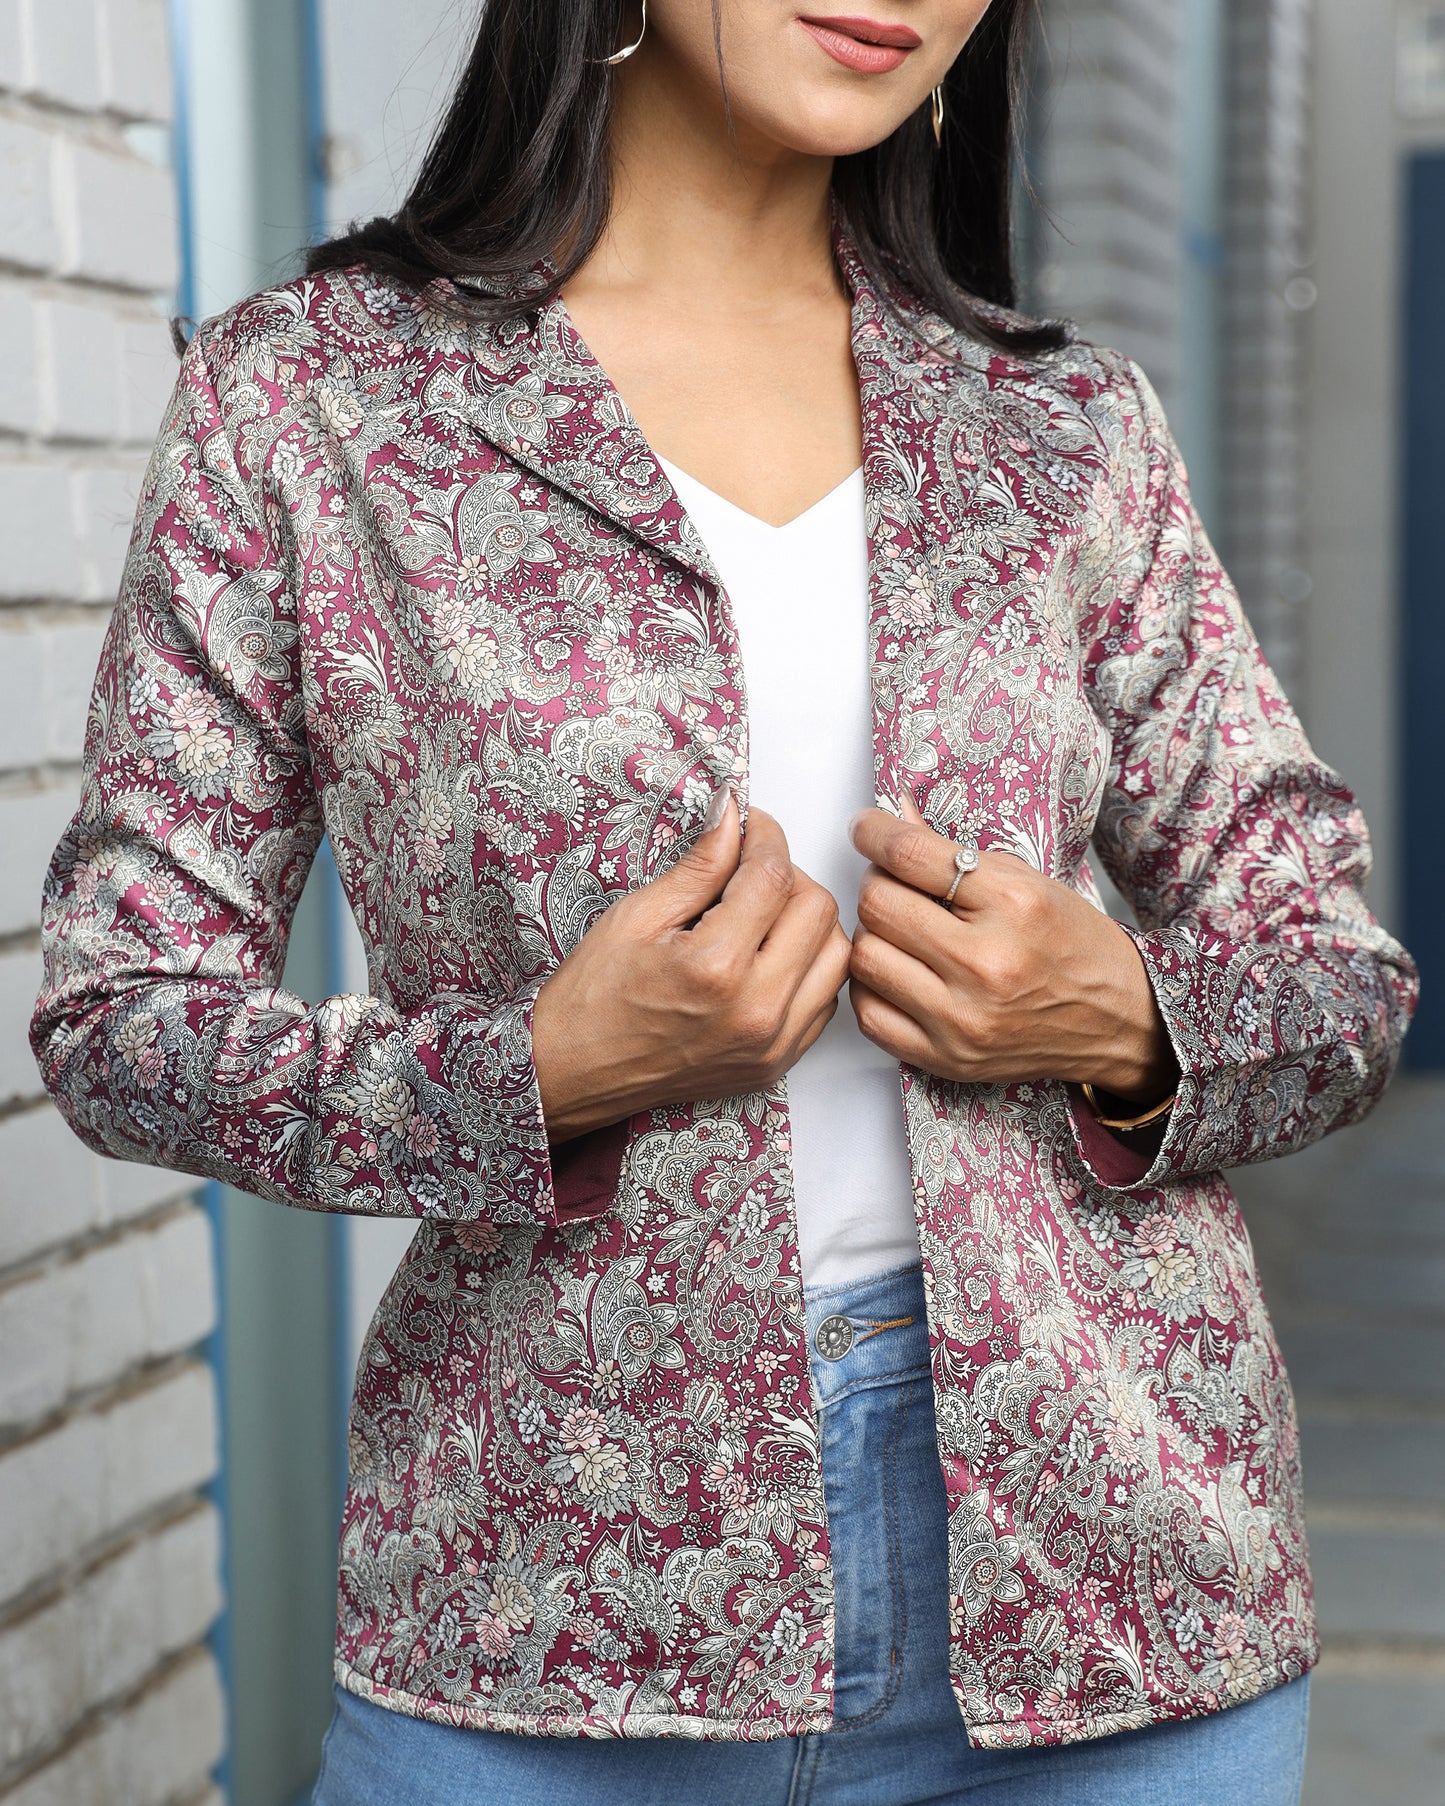 Effortless Polish: Your Perfect Crafted Women's Jacket